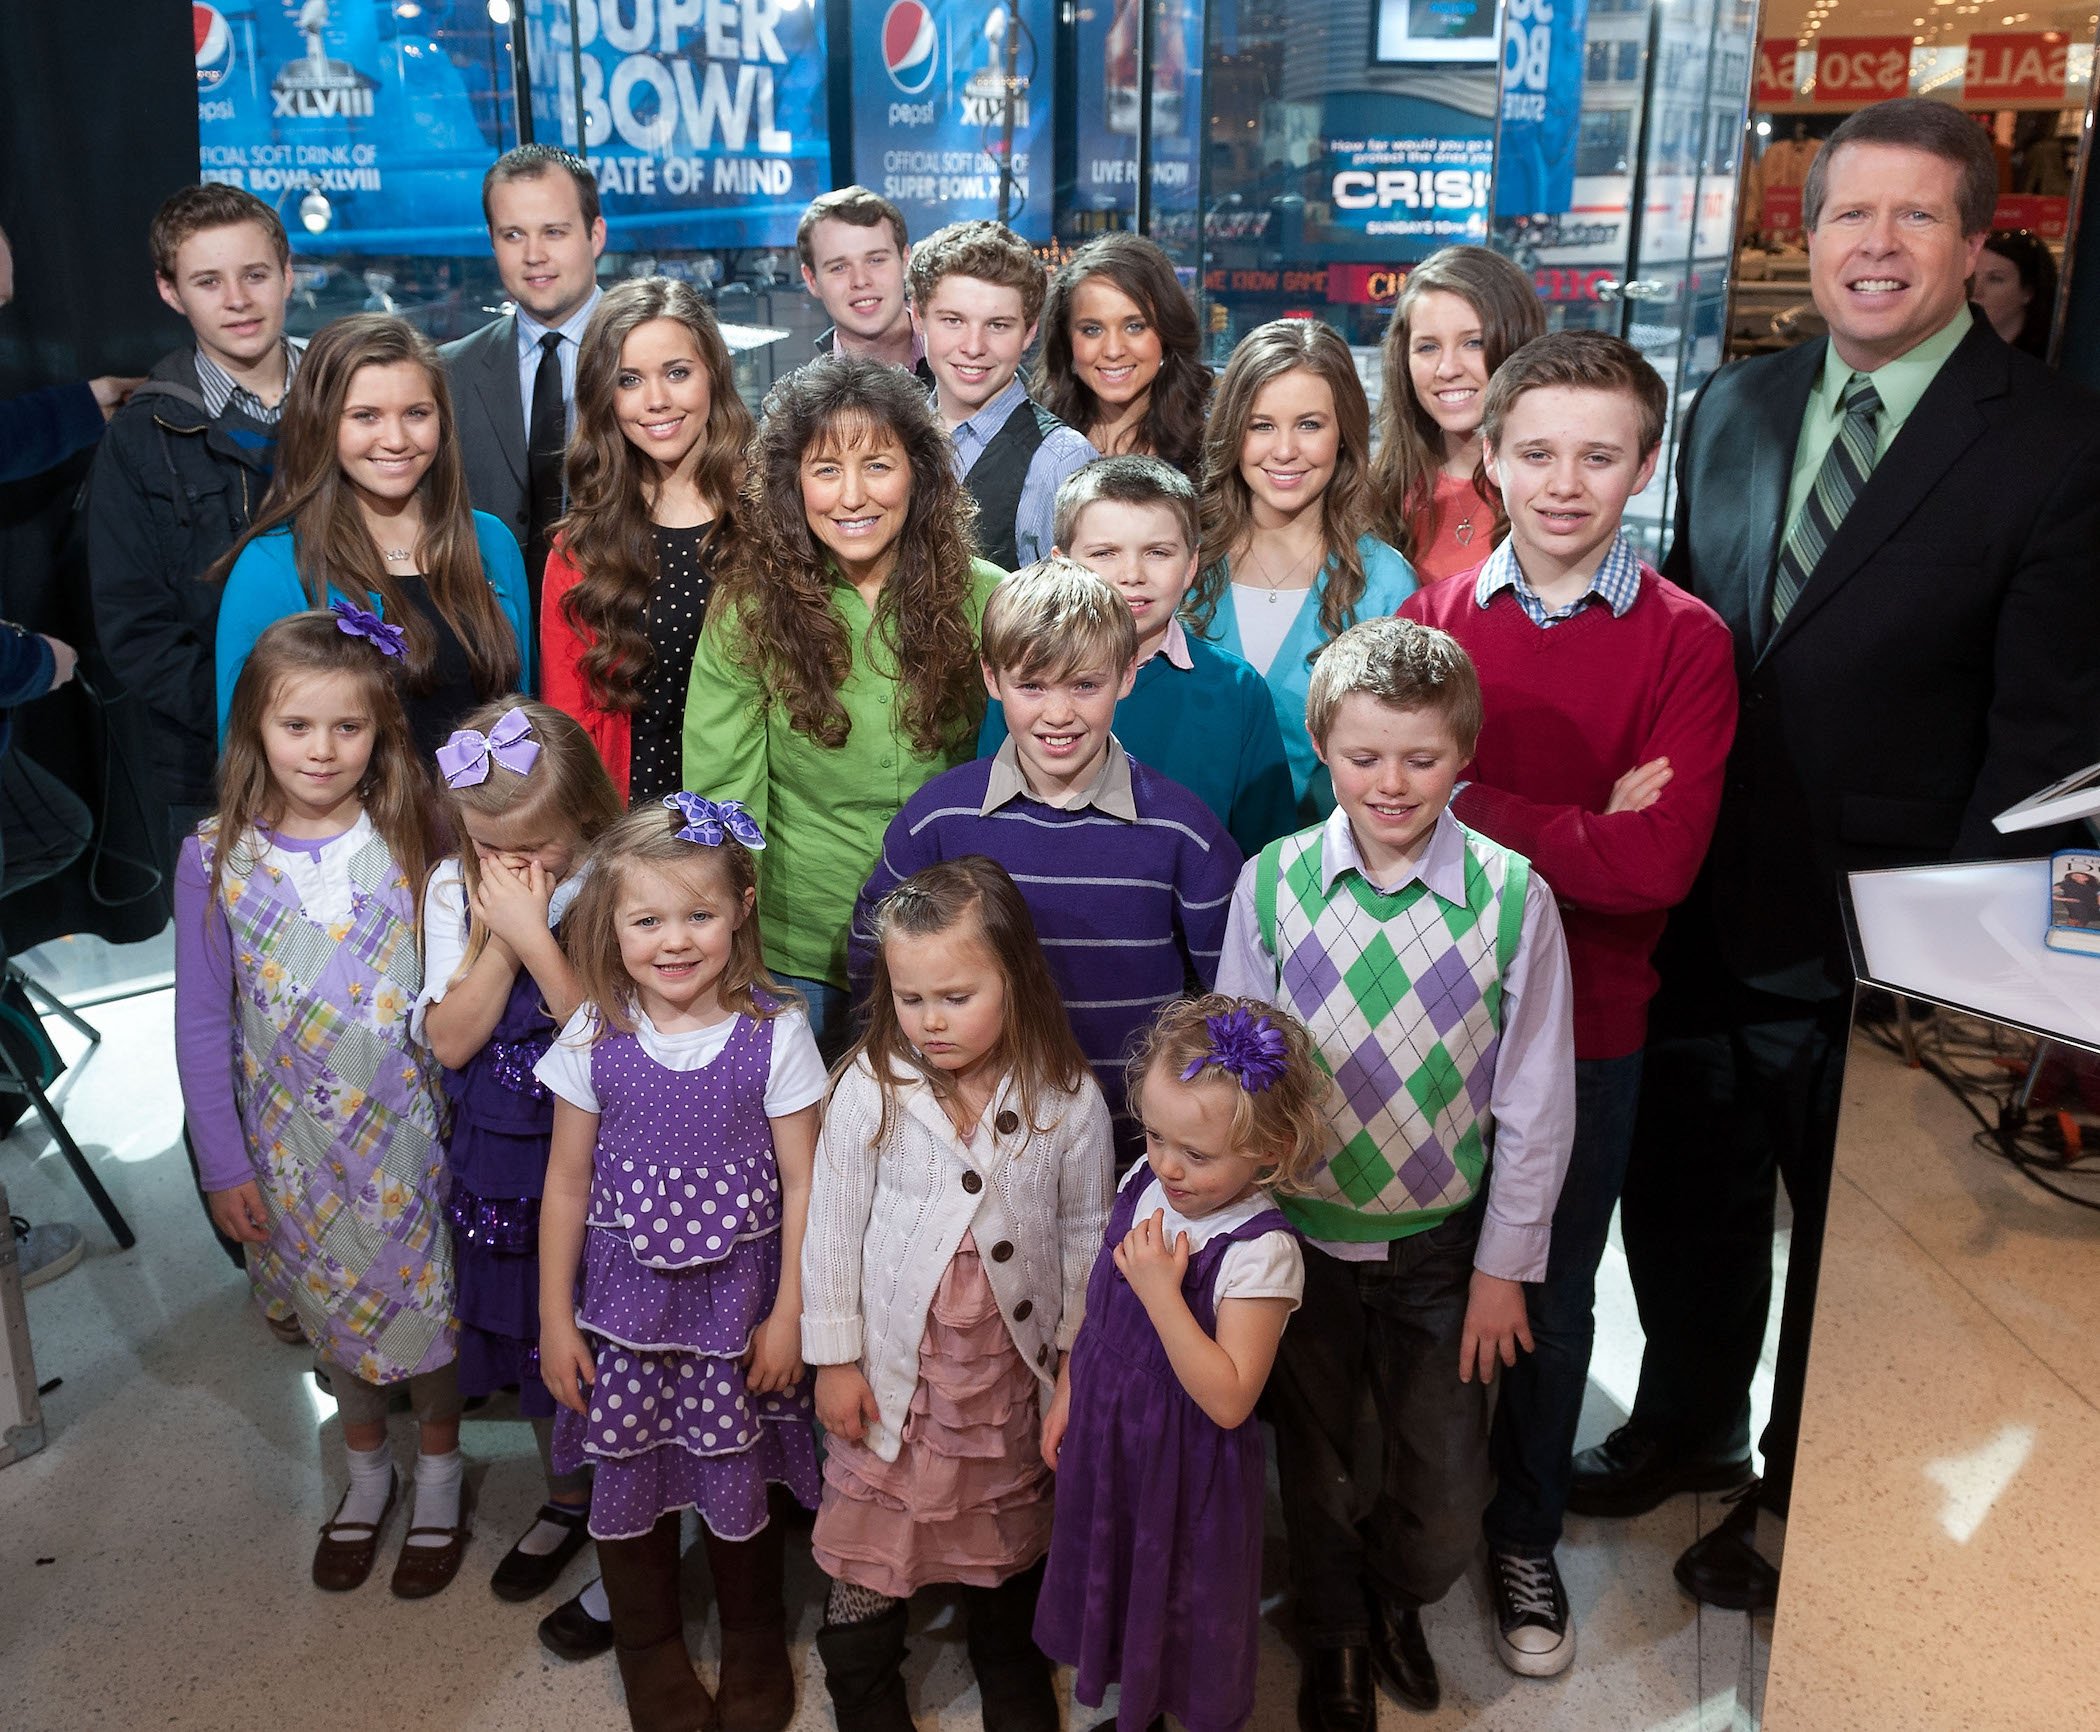 The Duggar family smiling at the camera on stage